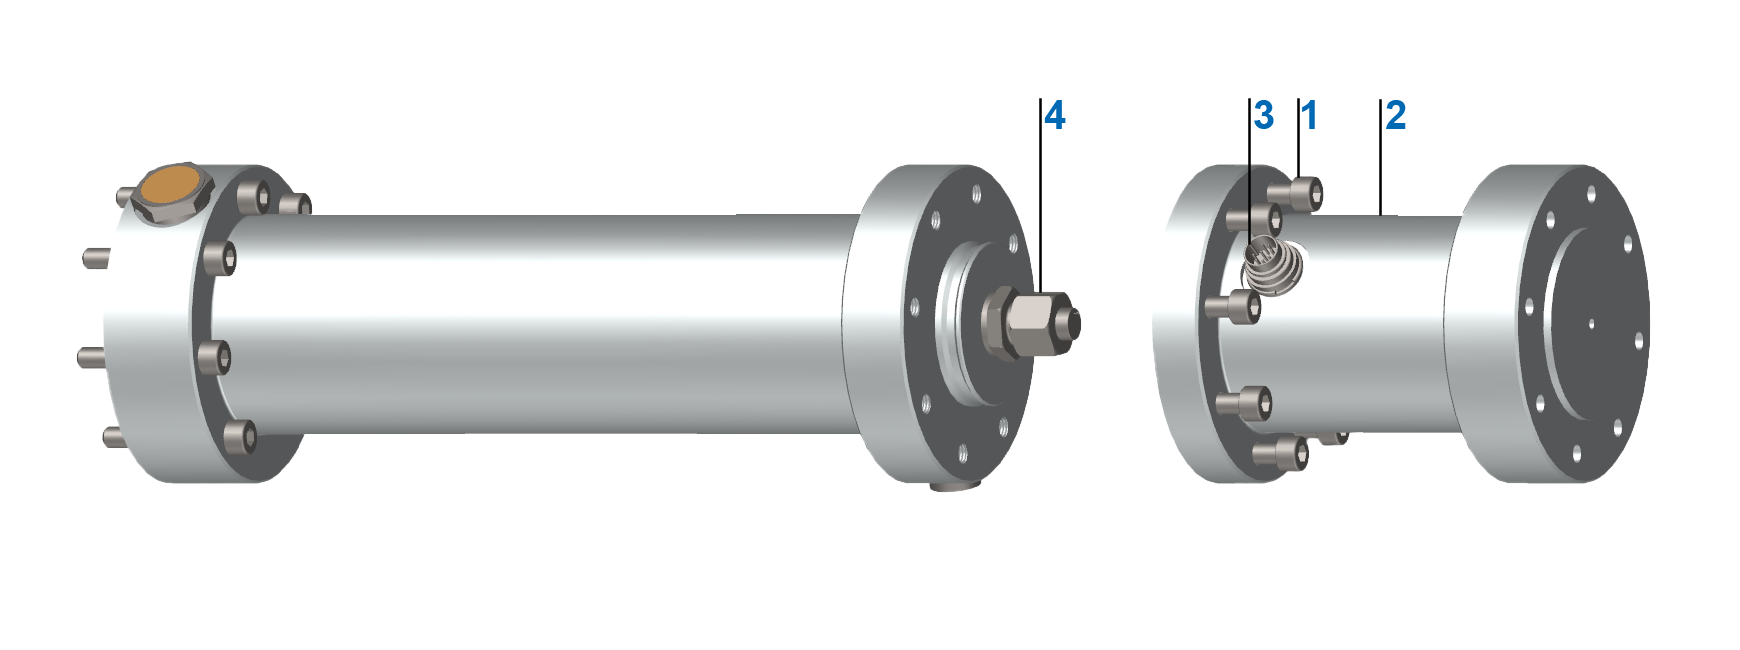 Tubus mounting for inductive position transducer - closed protection tube